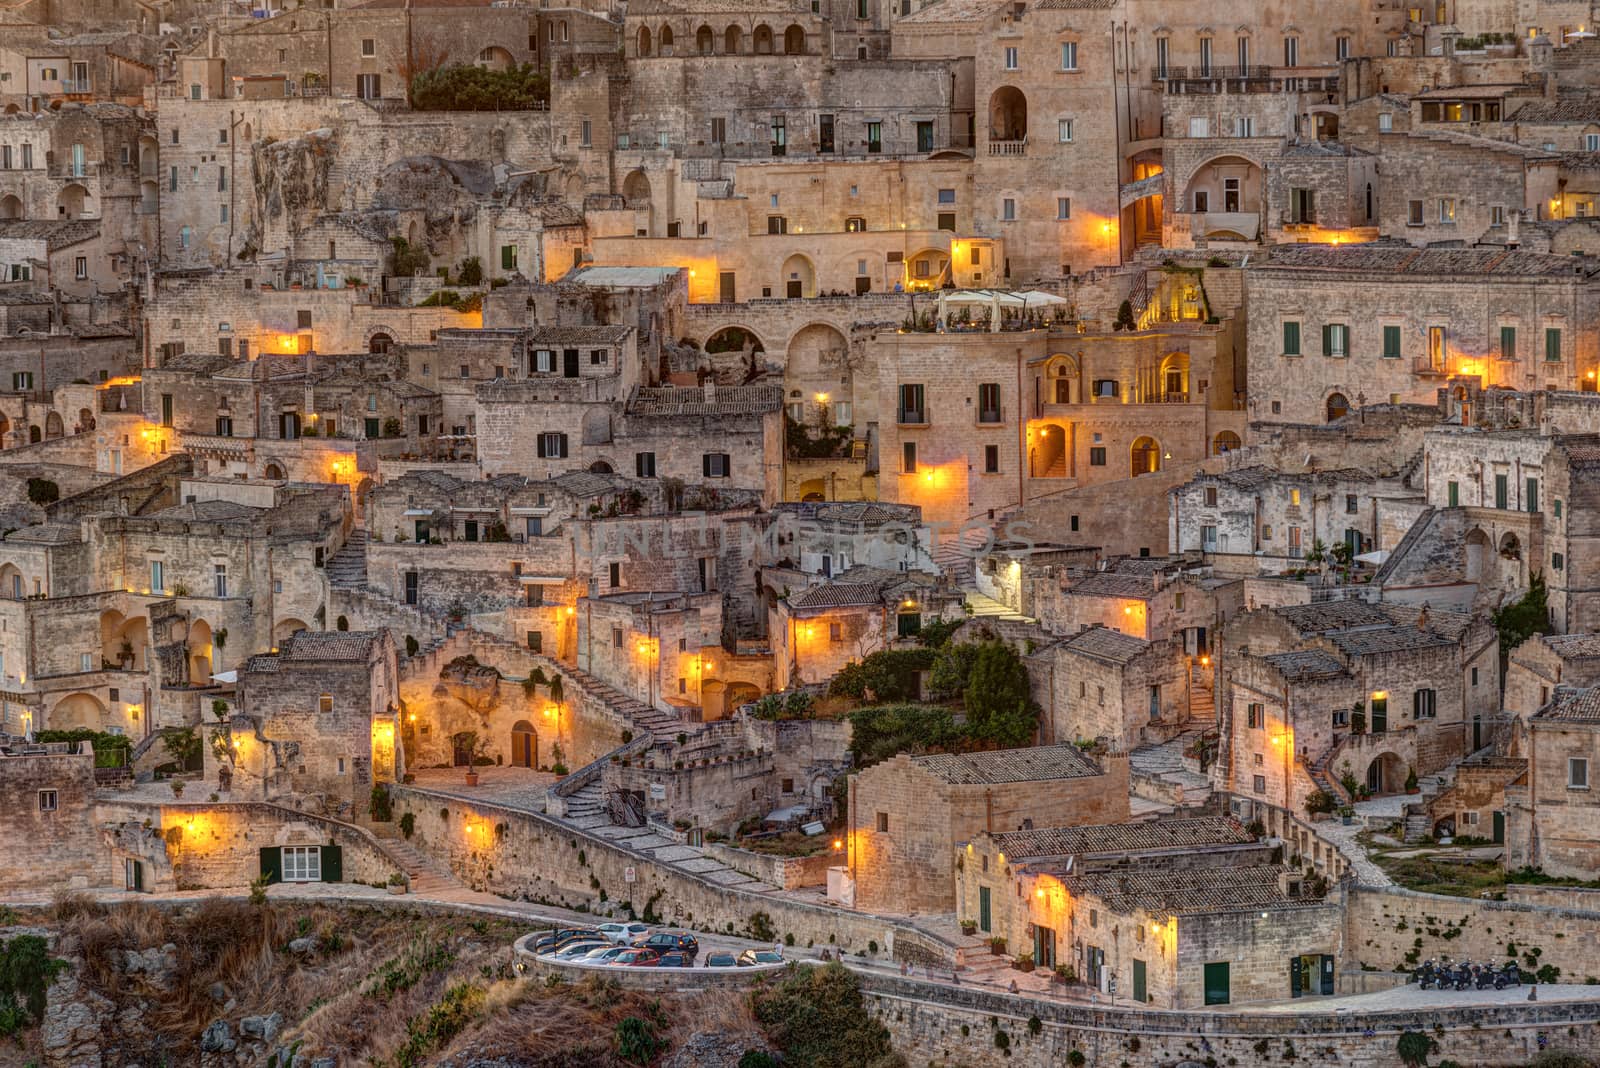 Detail of the old town of Matera by elxeneize